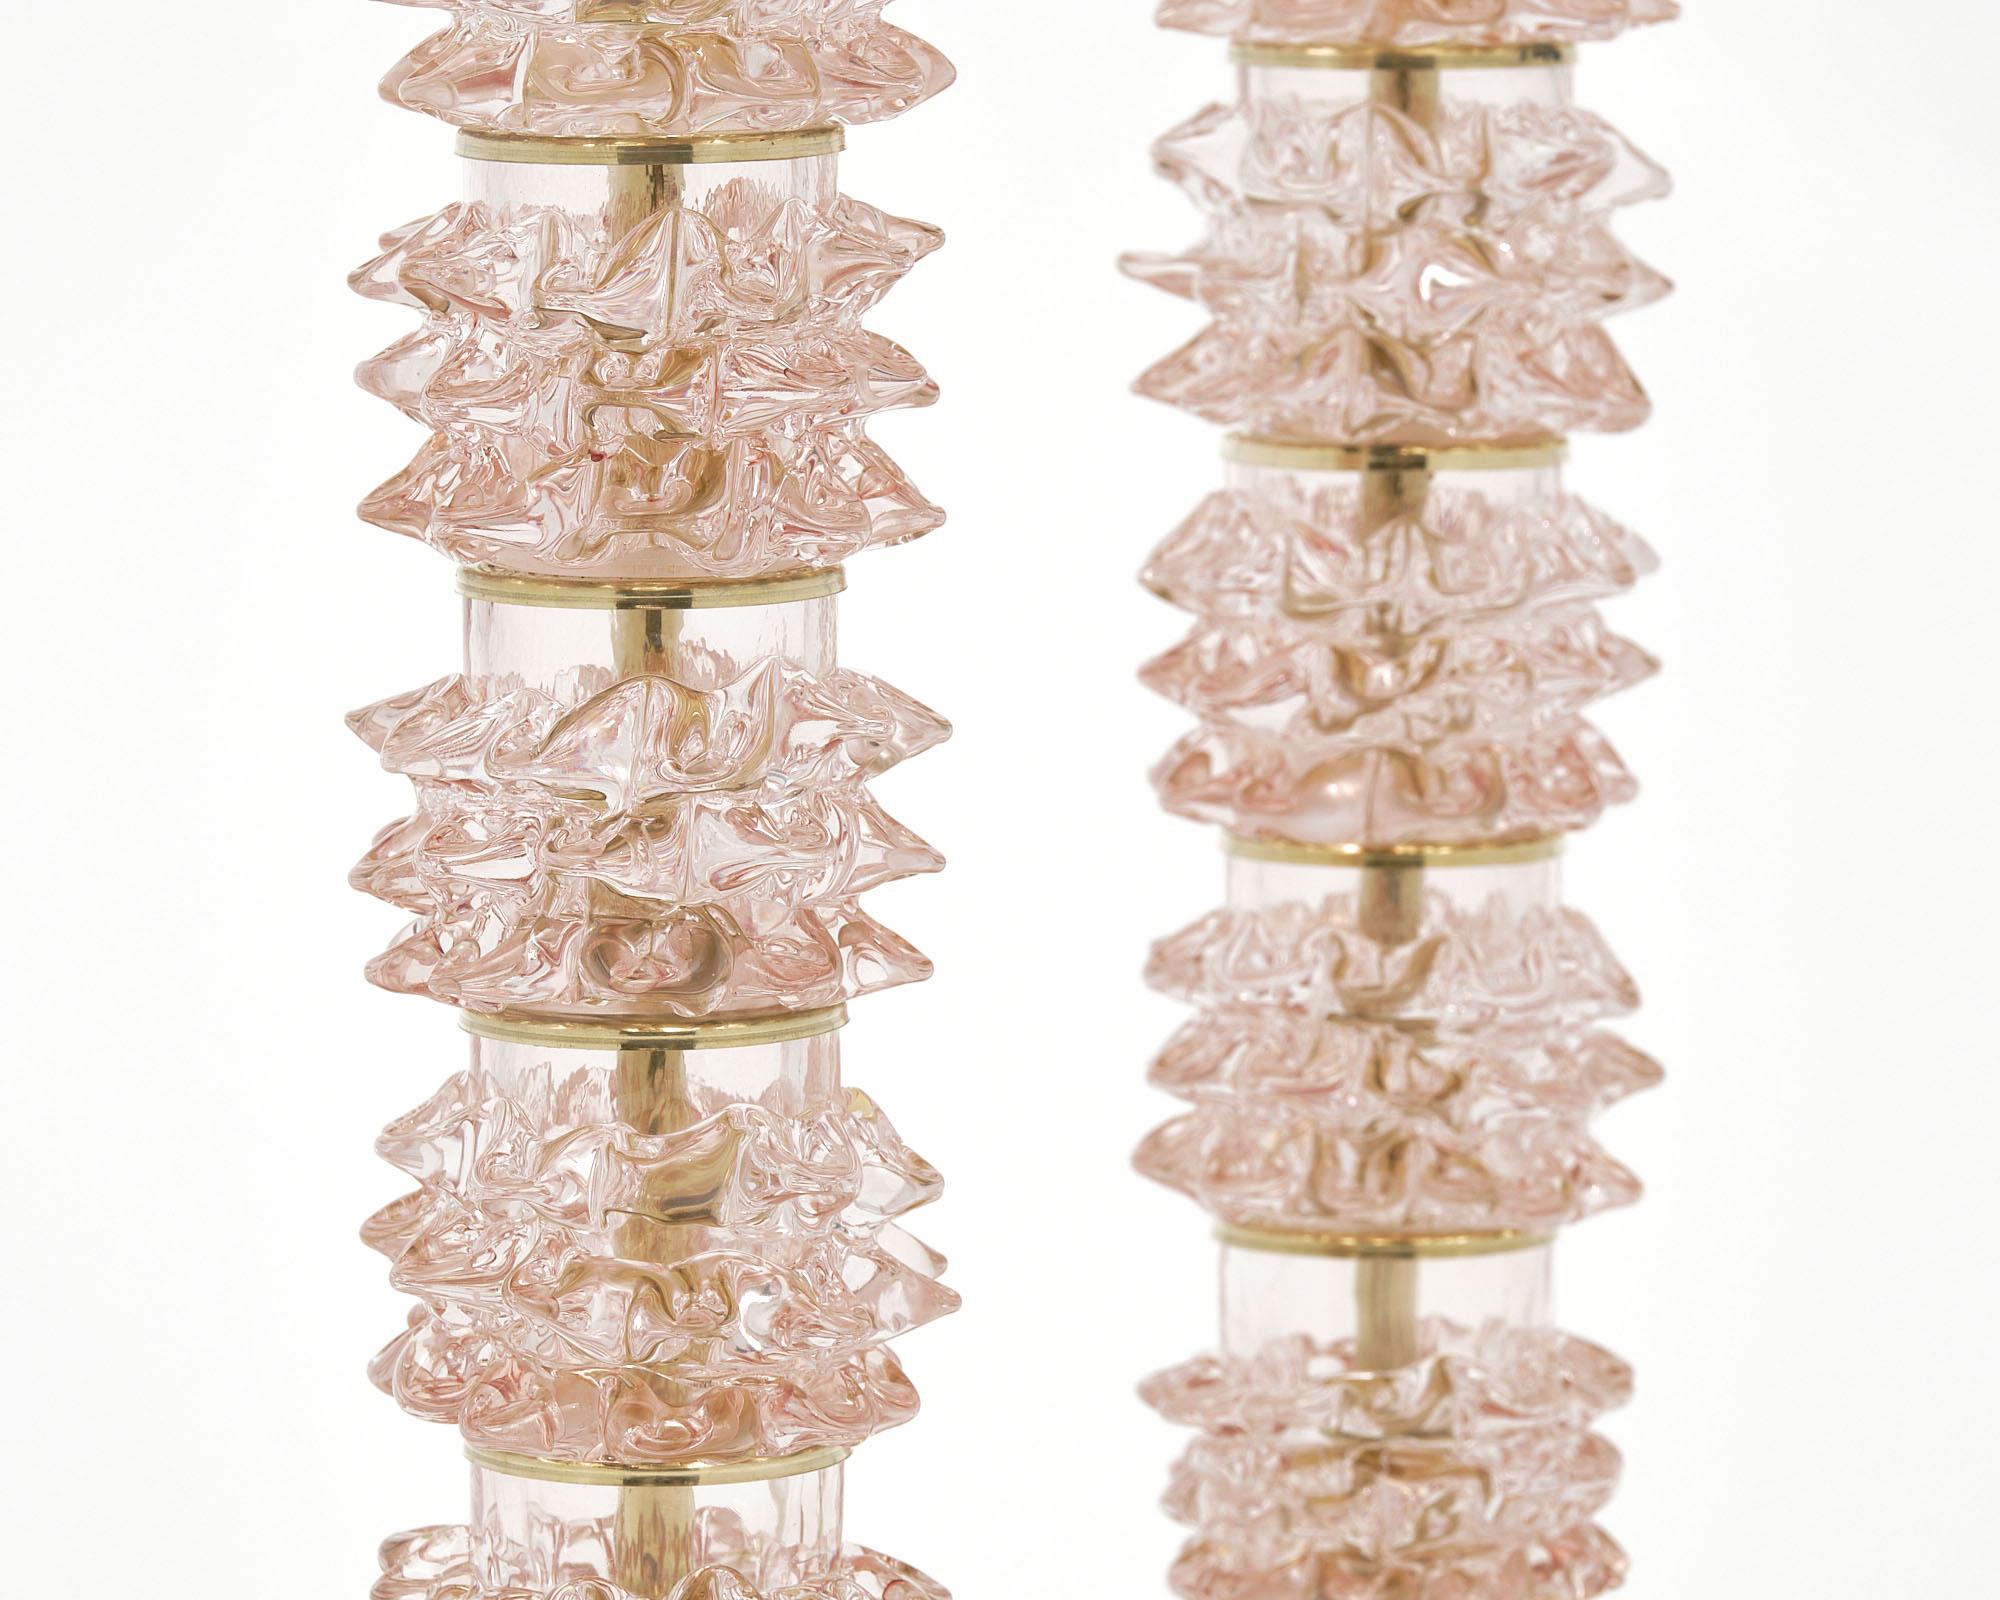 Pair of Italian lamps from the studios of Barovier on the island of Murano. Each lamp features five pink “Rostrate” glass components with a brass base and stem.